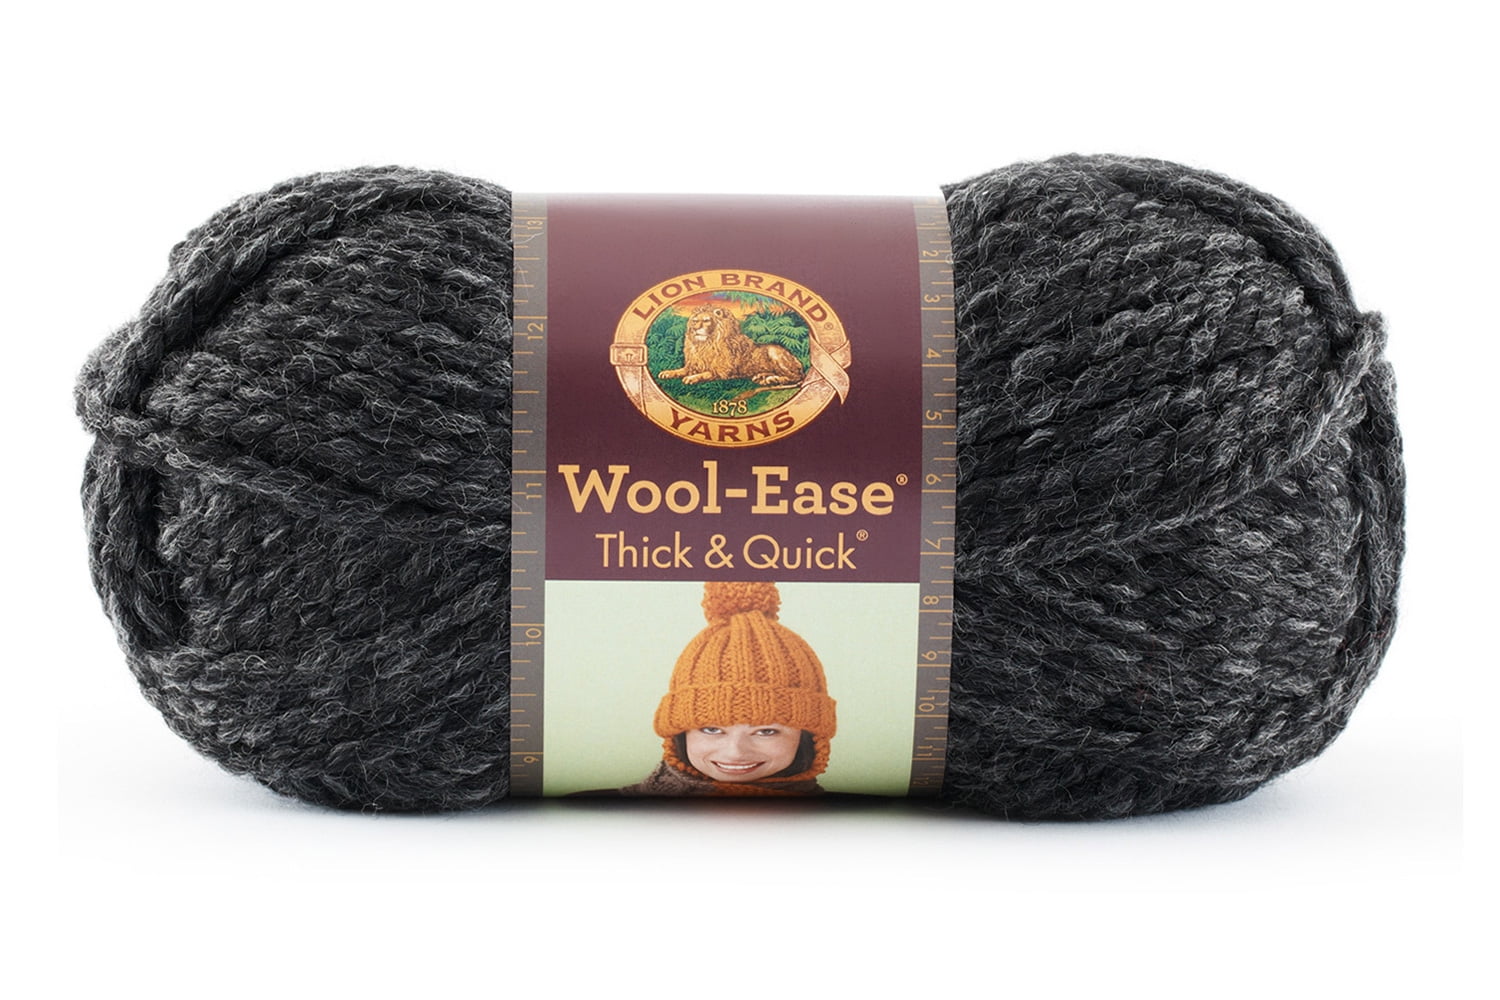 Lion Brand Wool-Ease Thick & Quick Yarn-Red Beacon, 1 count - Food 4 Less